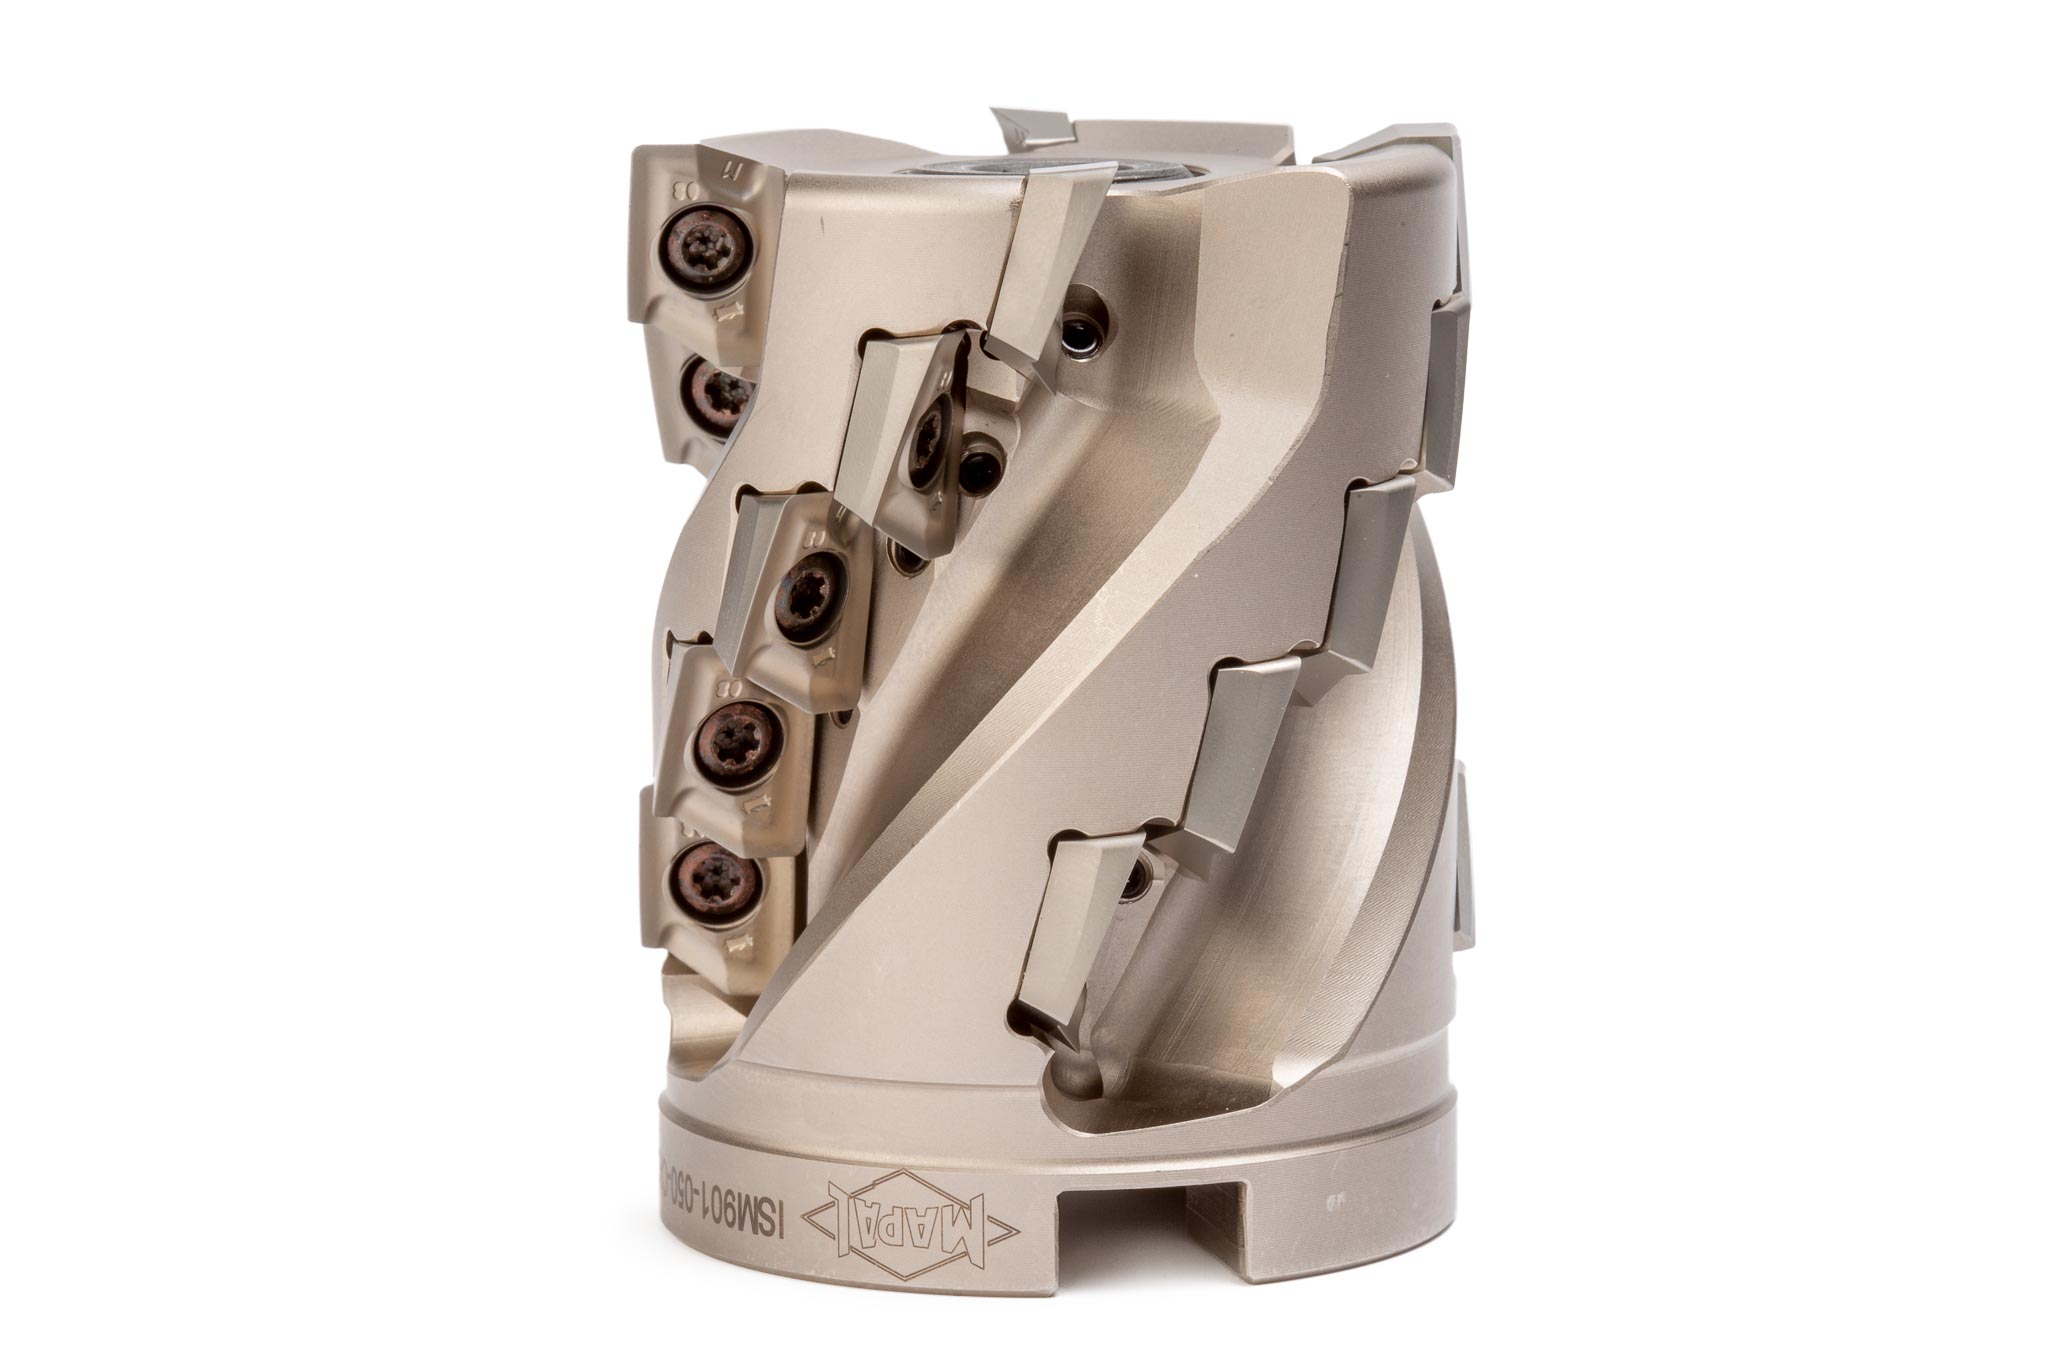 A radial indexable insert milling cutter NeoMill-Titan from MAPAL.